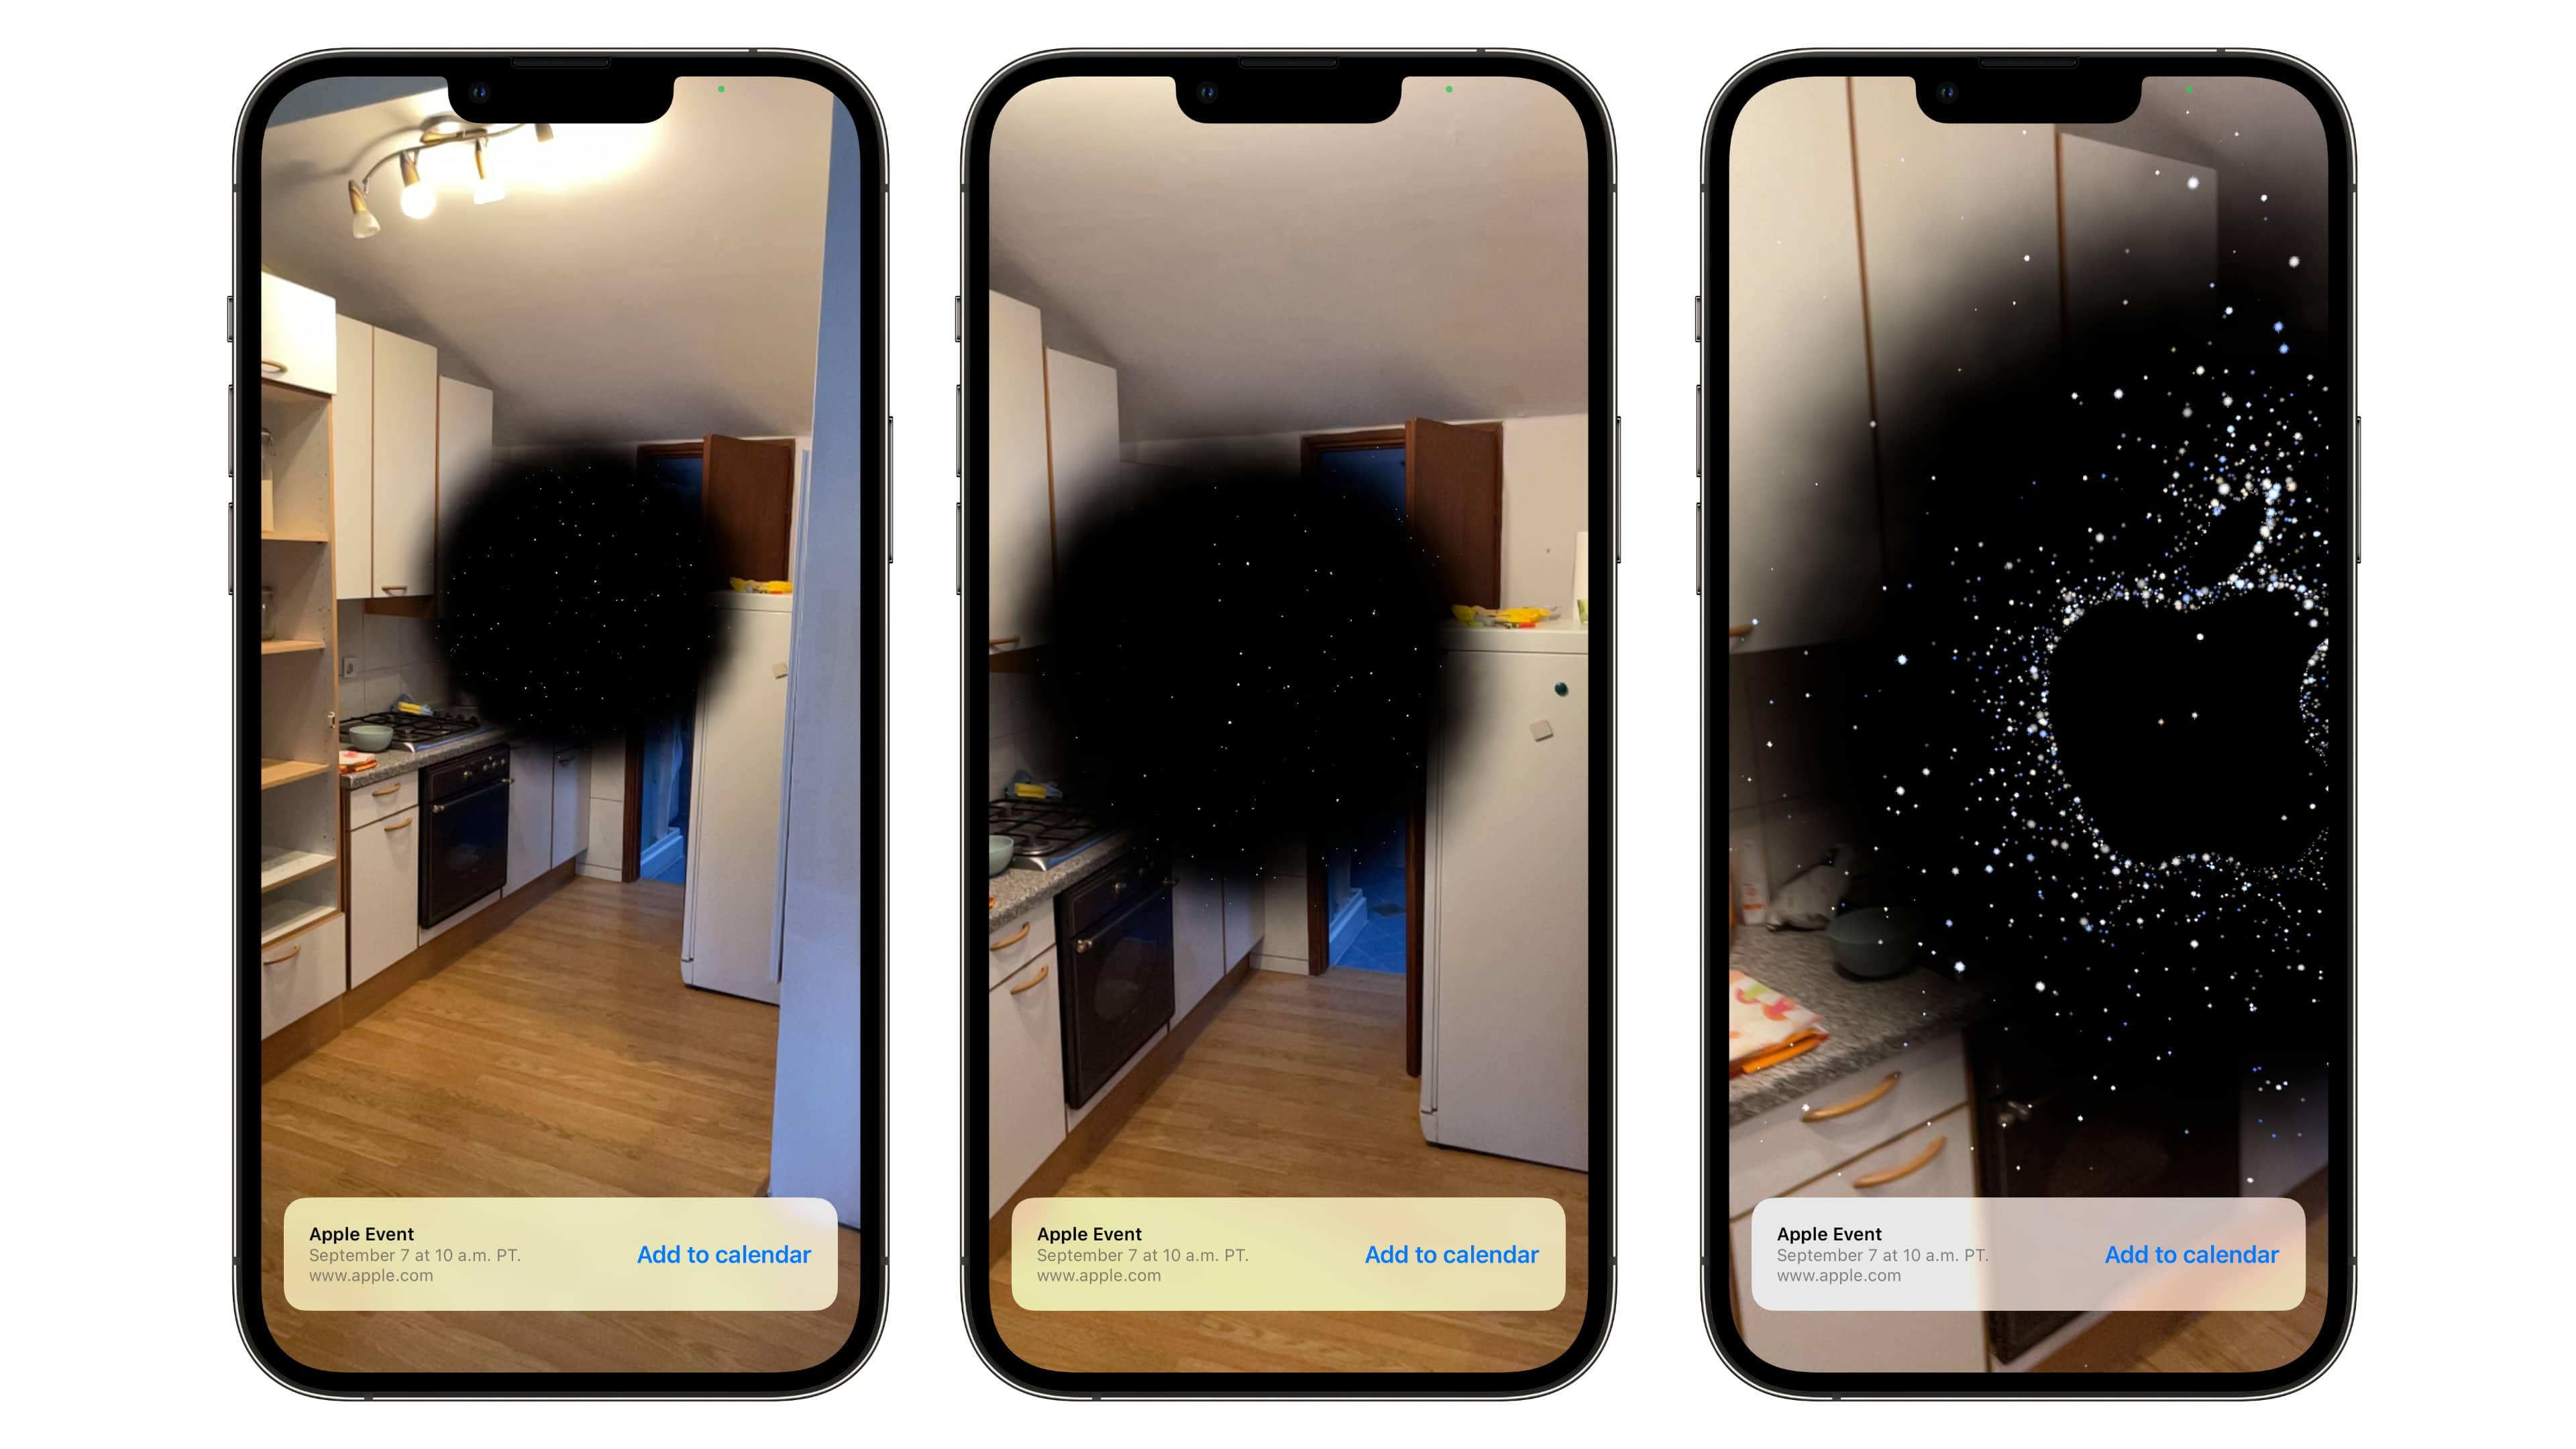 Three iPhone screenshots showcasing Apple's augmented reality easter egg surprise for the iPhone 14 even